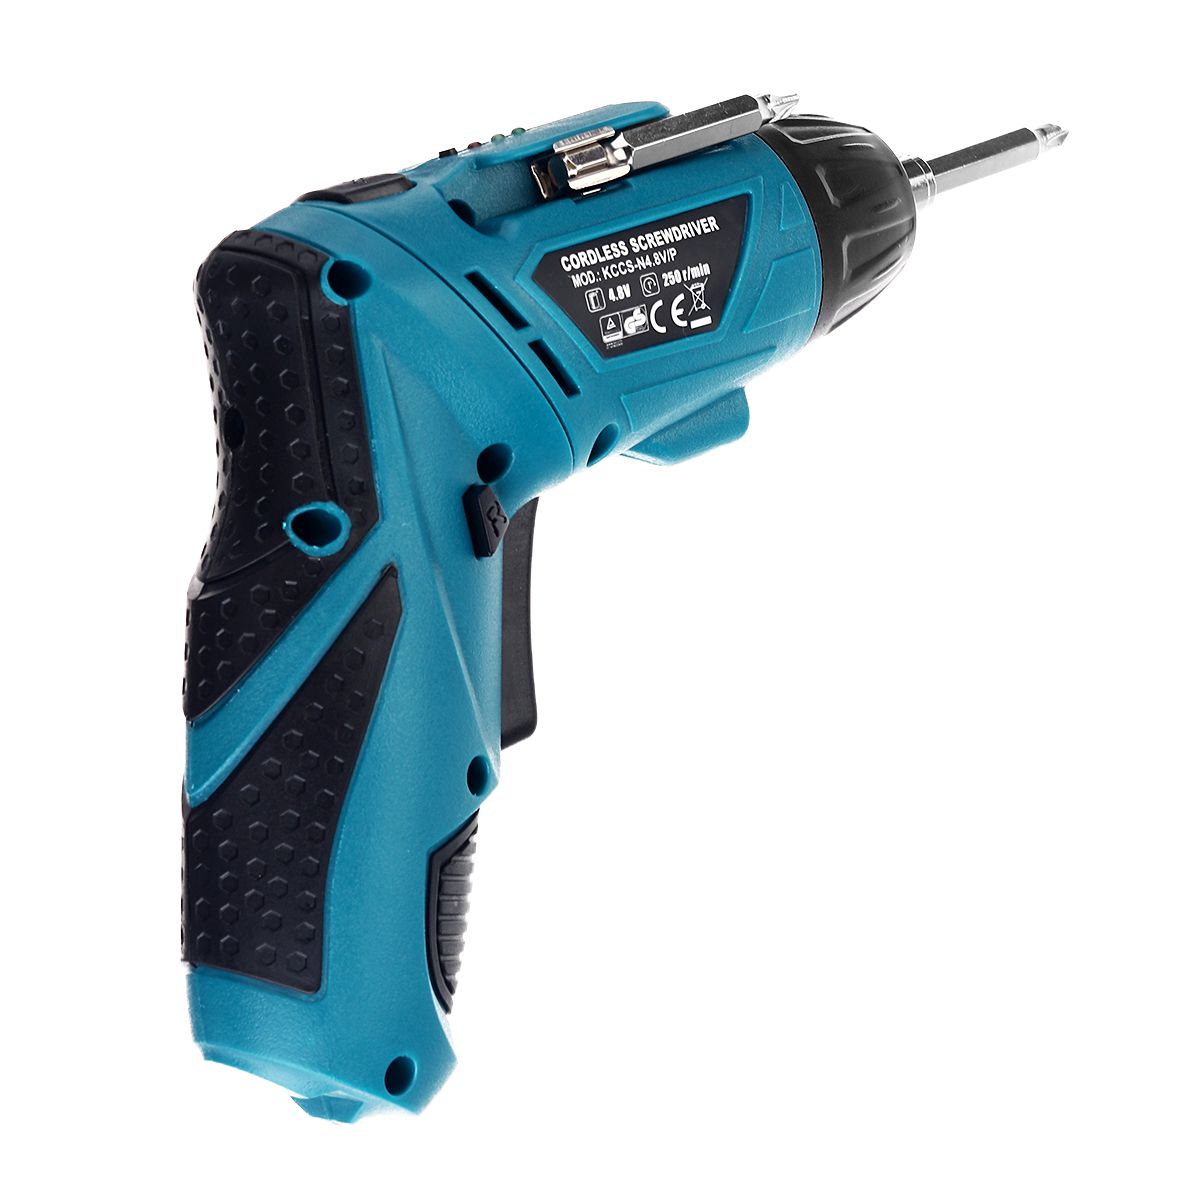 48V-Electric-Drill-Screw-Driver-Rechargeable-Cordless-Screwdriver-Tool-Drill-Bit-Set-1678689